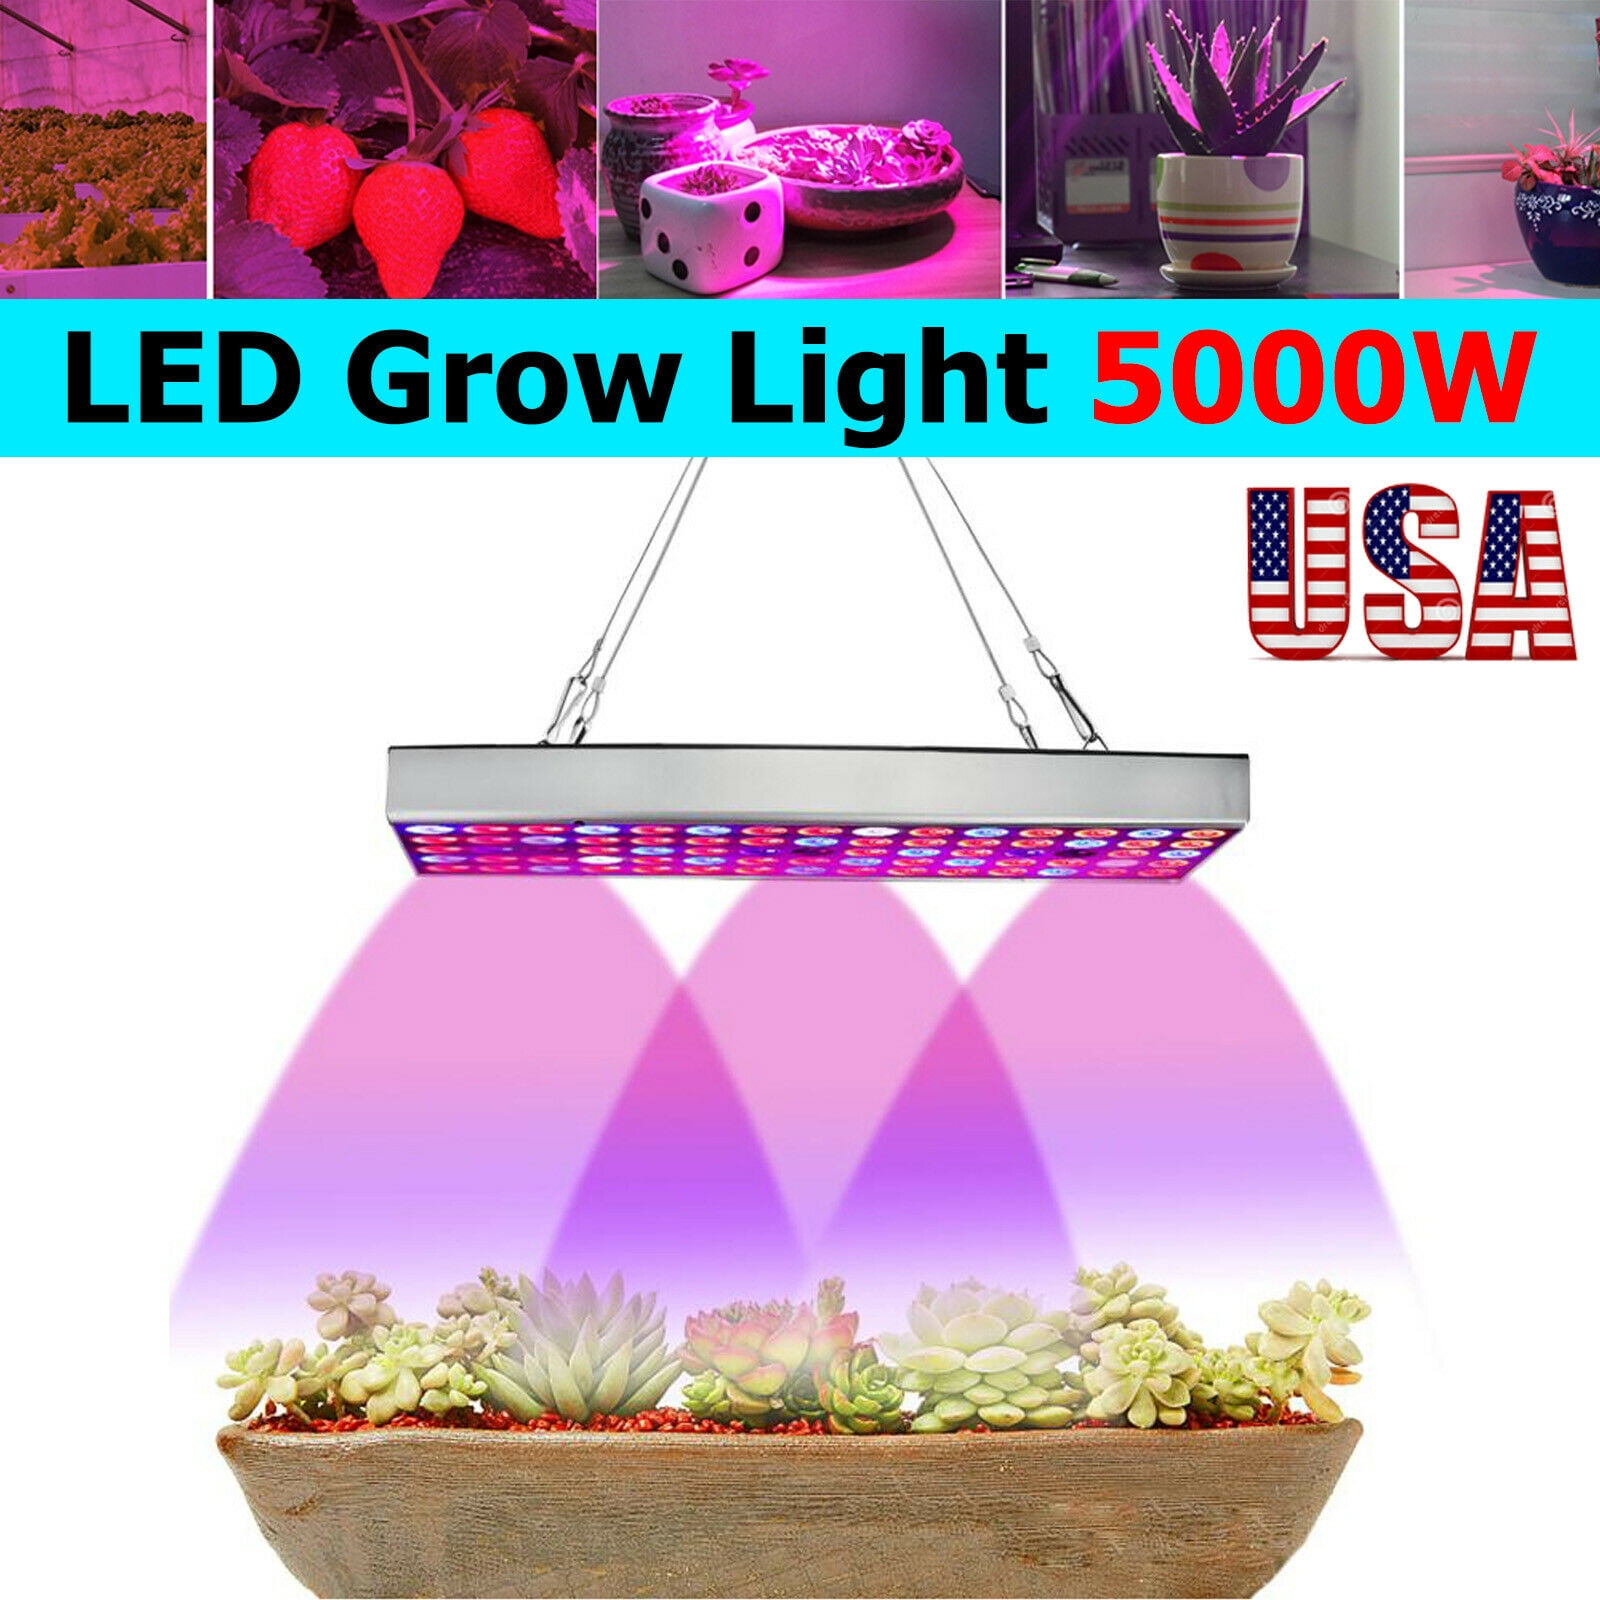 Details about   3000W LED Grow Plant Light Panel Lamp Full Spectrum For Hydroponic Plant Veg 